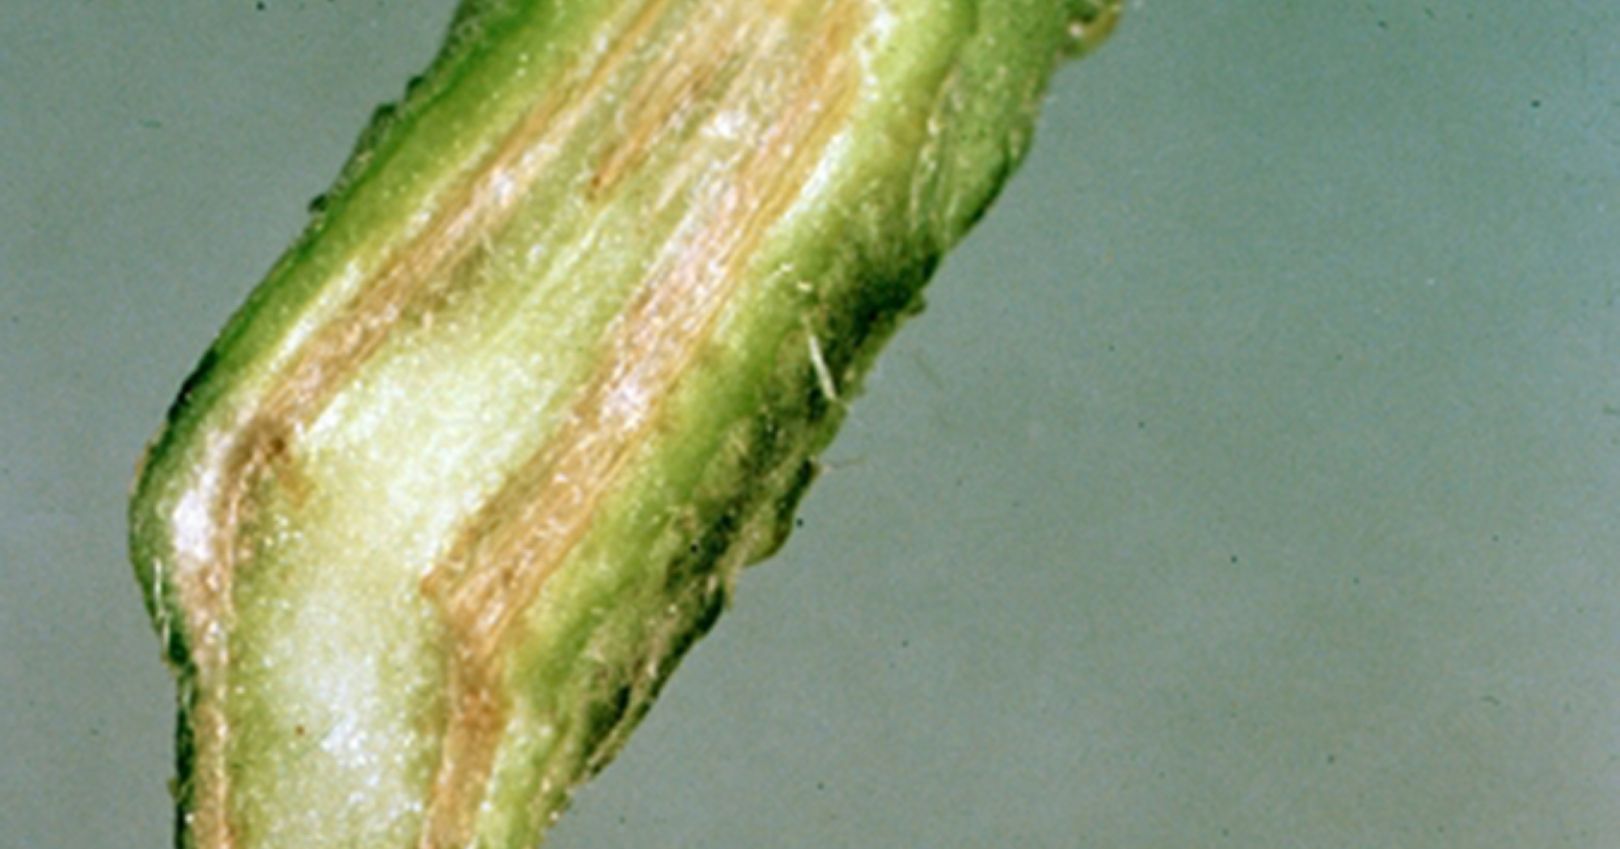 Wilt Diseases May Cause Vascular Discoloration